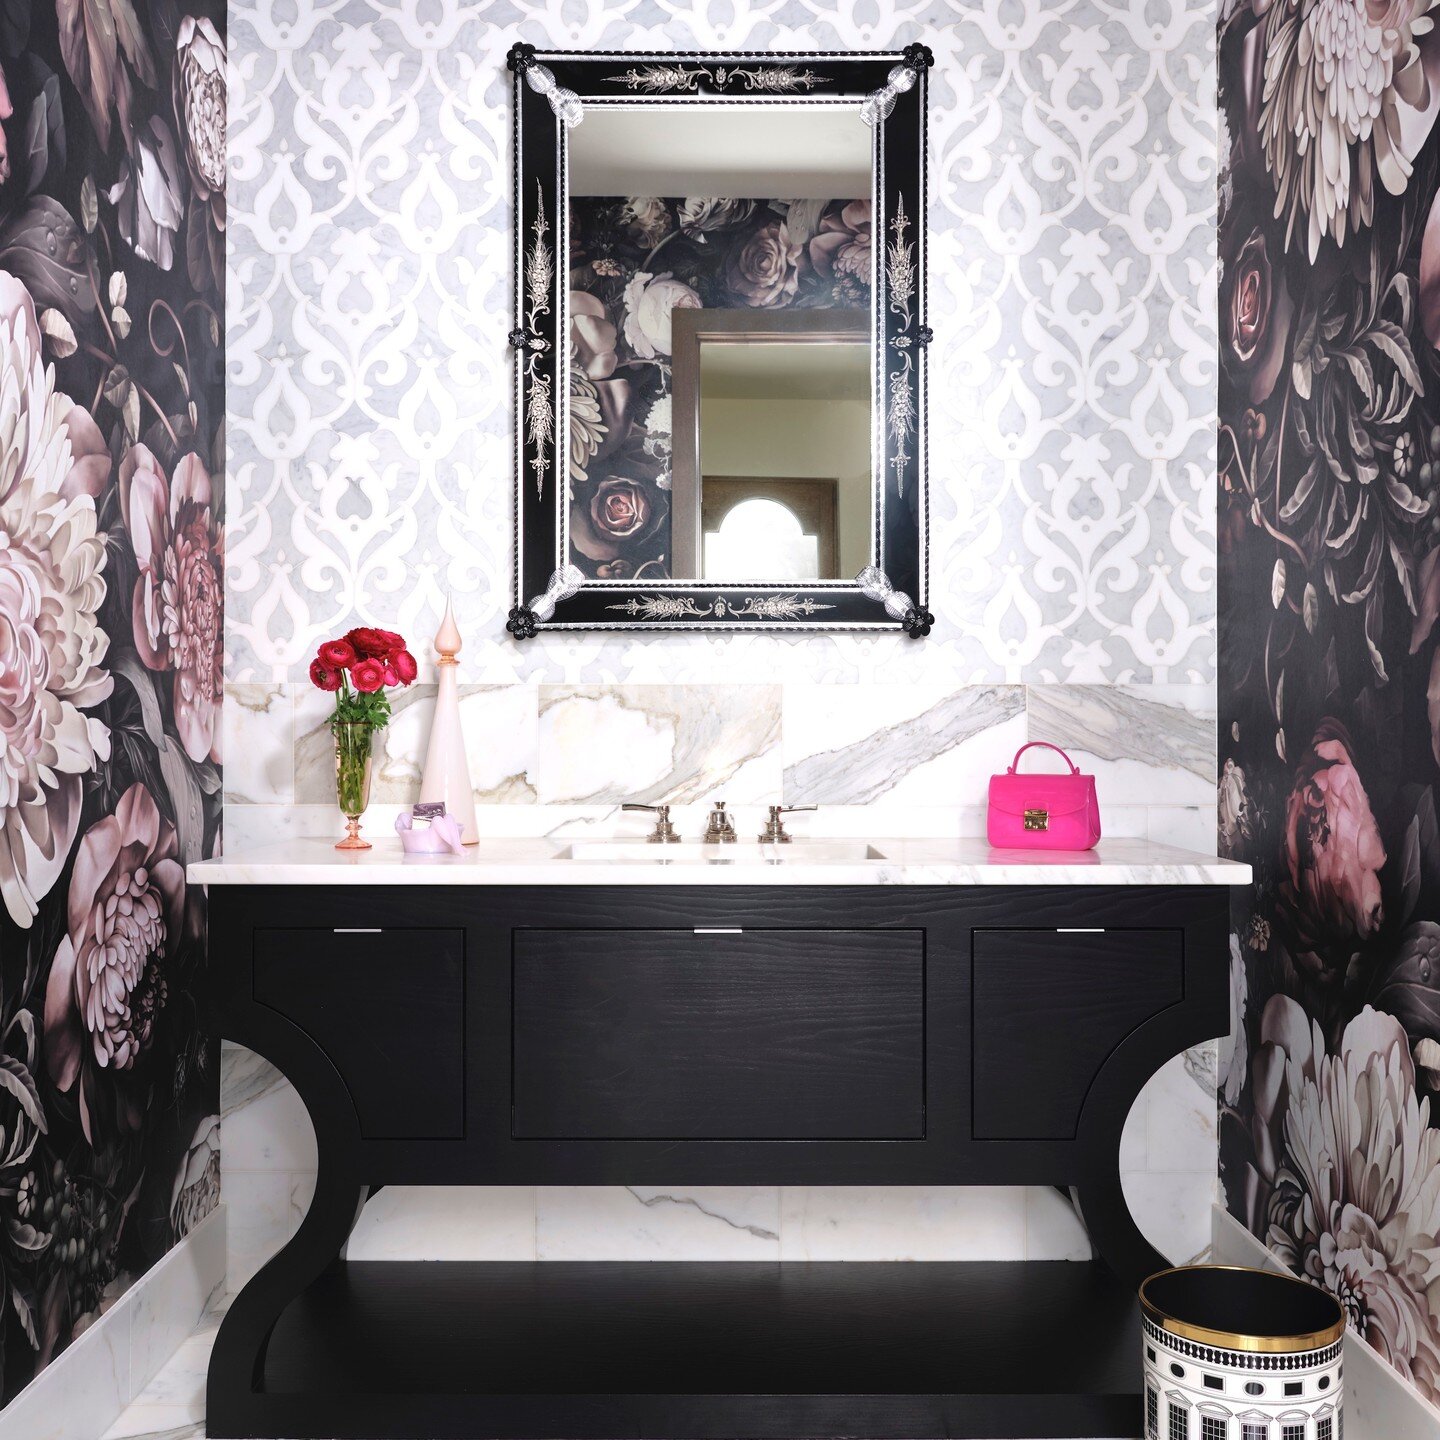 It wouldn&rsquo;t be wallpaper Wednesday without @elliecashmandesign&rsquo;s giant floral print. We&rsquo;re loving the drama of the Dark Floral II at 200%, big and bold and the perfect counterpoint to the marble finishes and custom Venetian mirror. 